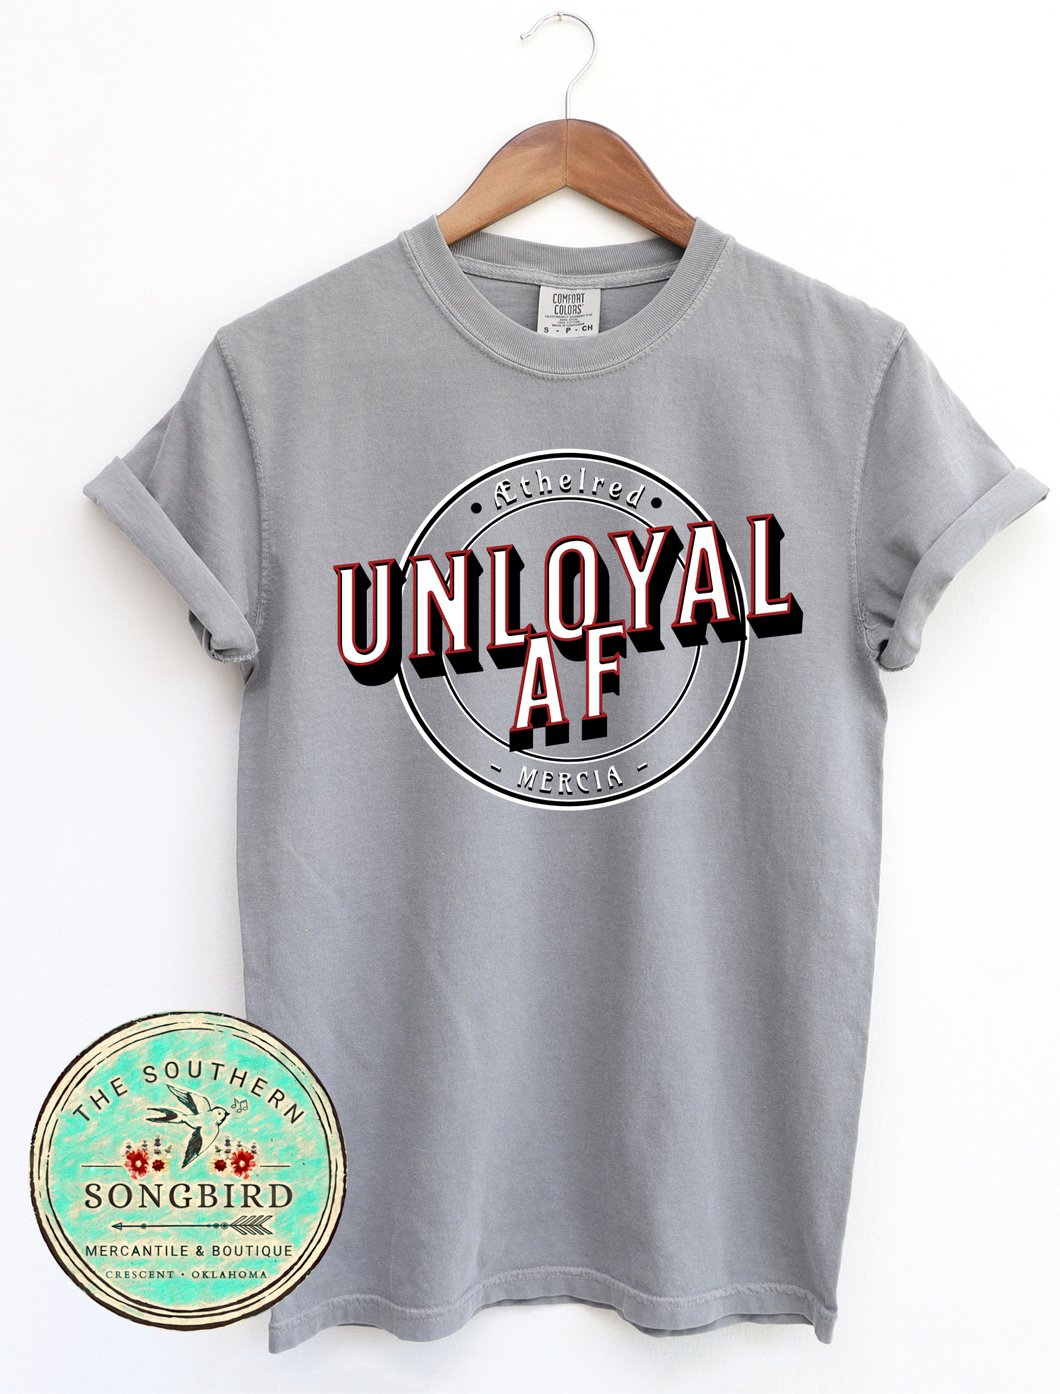 SALE!! Ready To Ship!! Lord Aethelred - Unloyal AF Graphic T-shirt